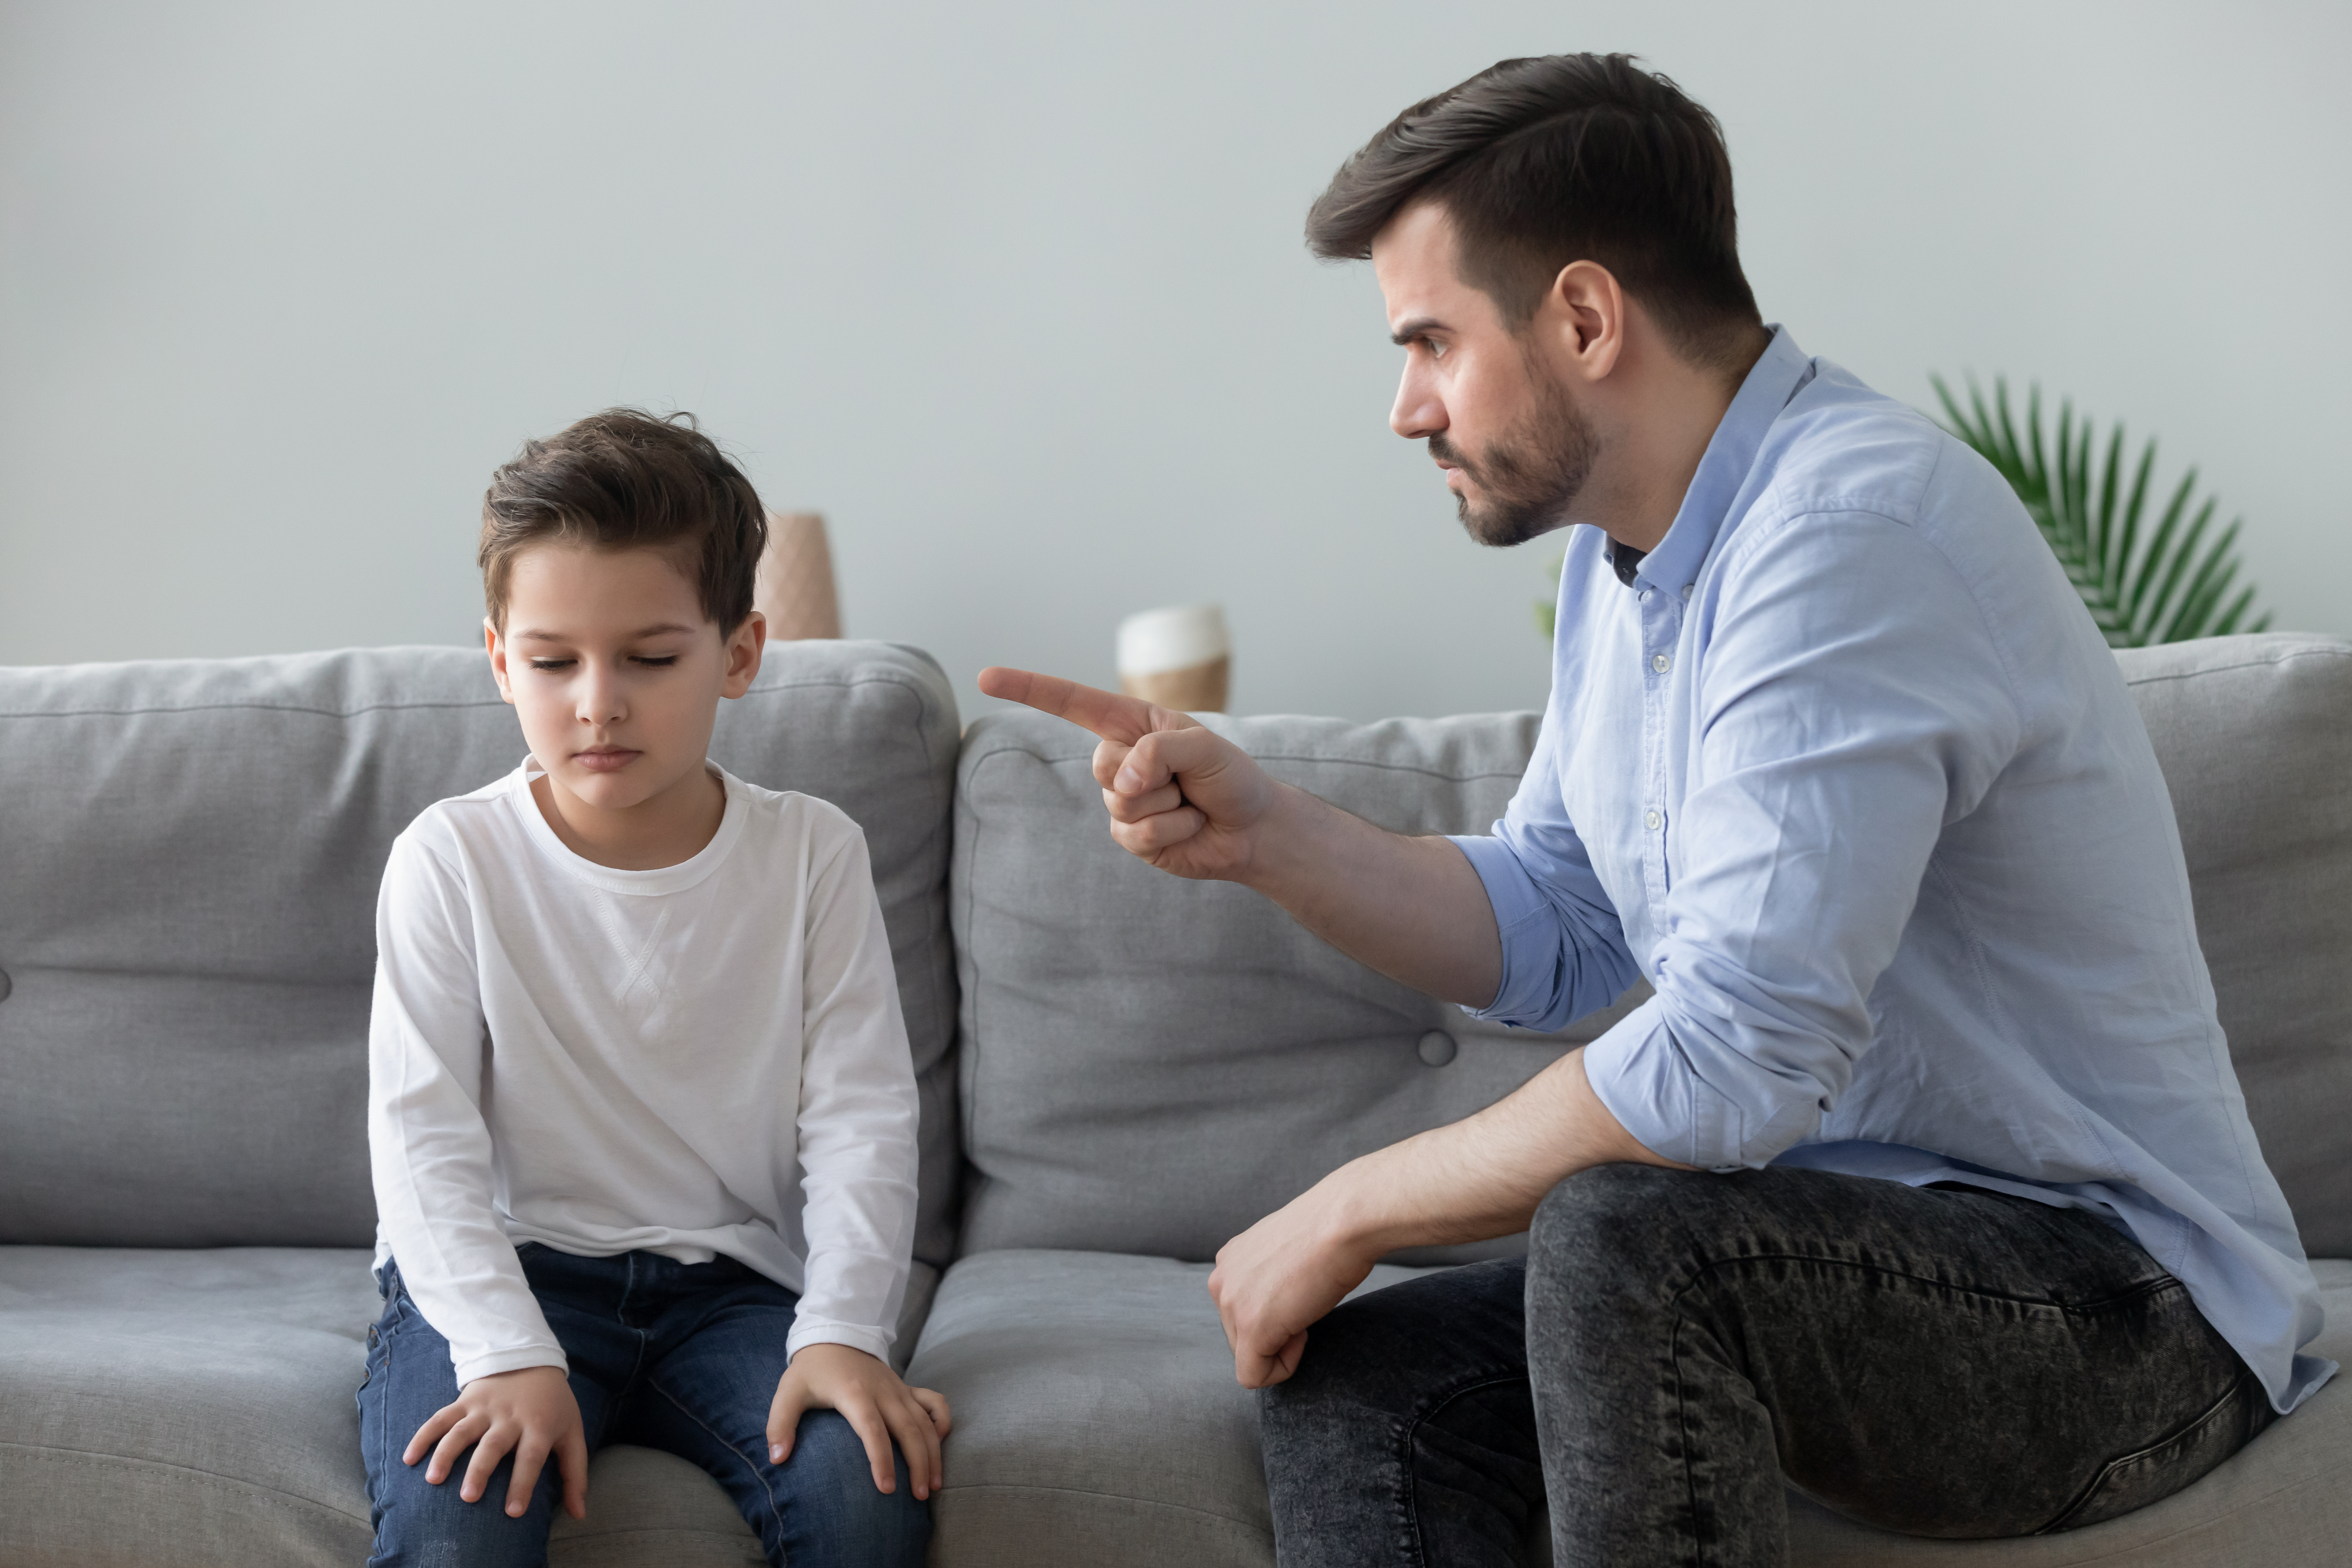 A young father is pictured disciplining his little son | Source: Shutterstock